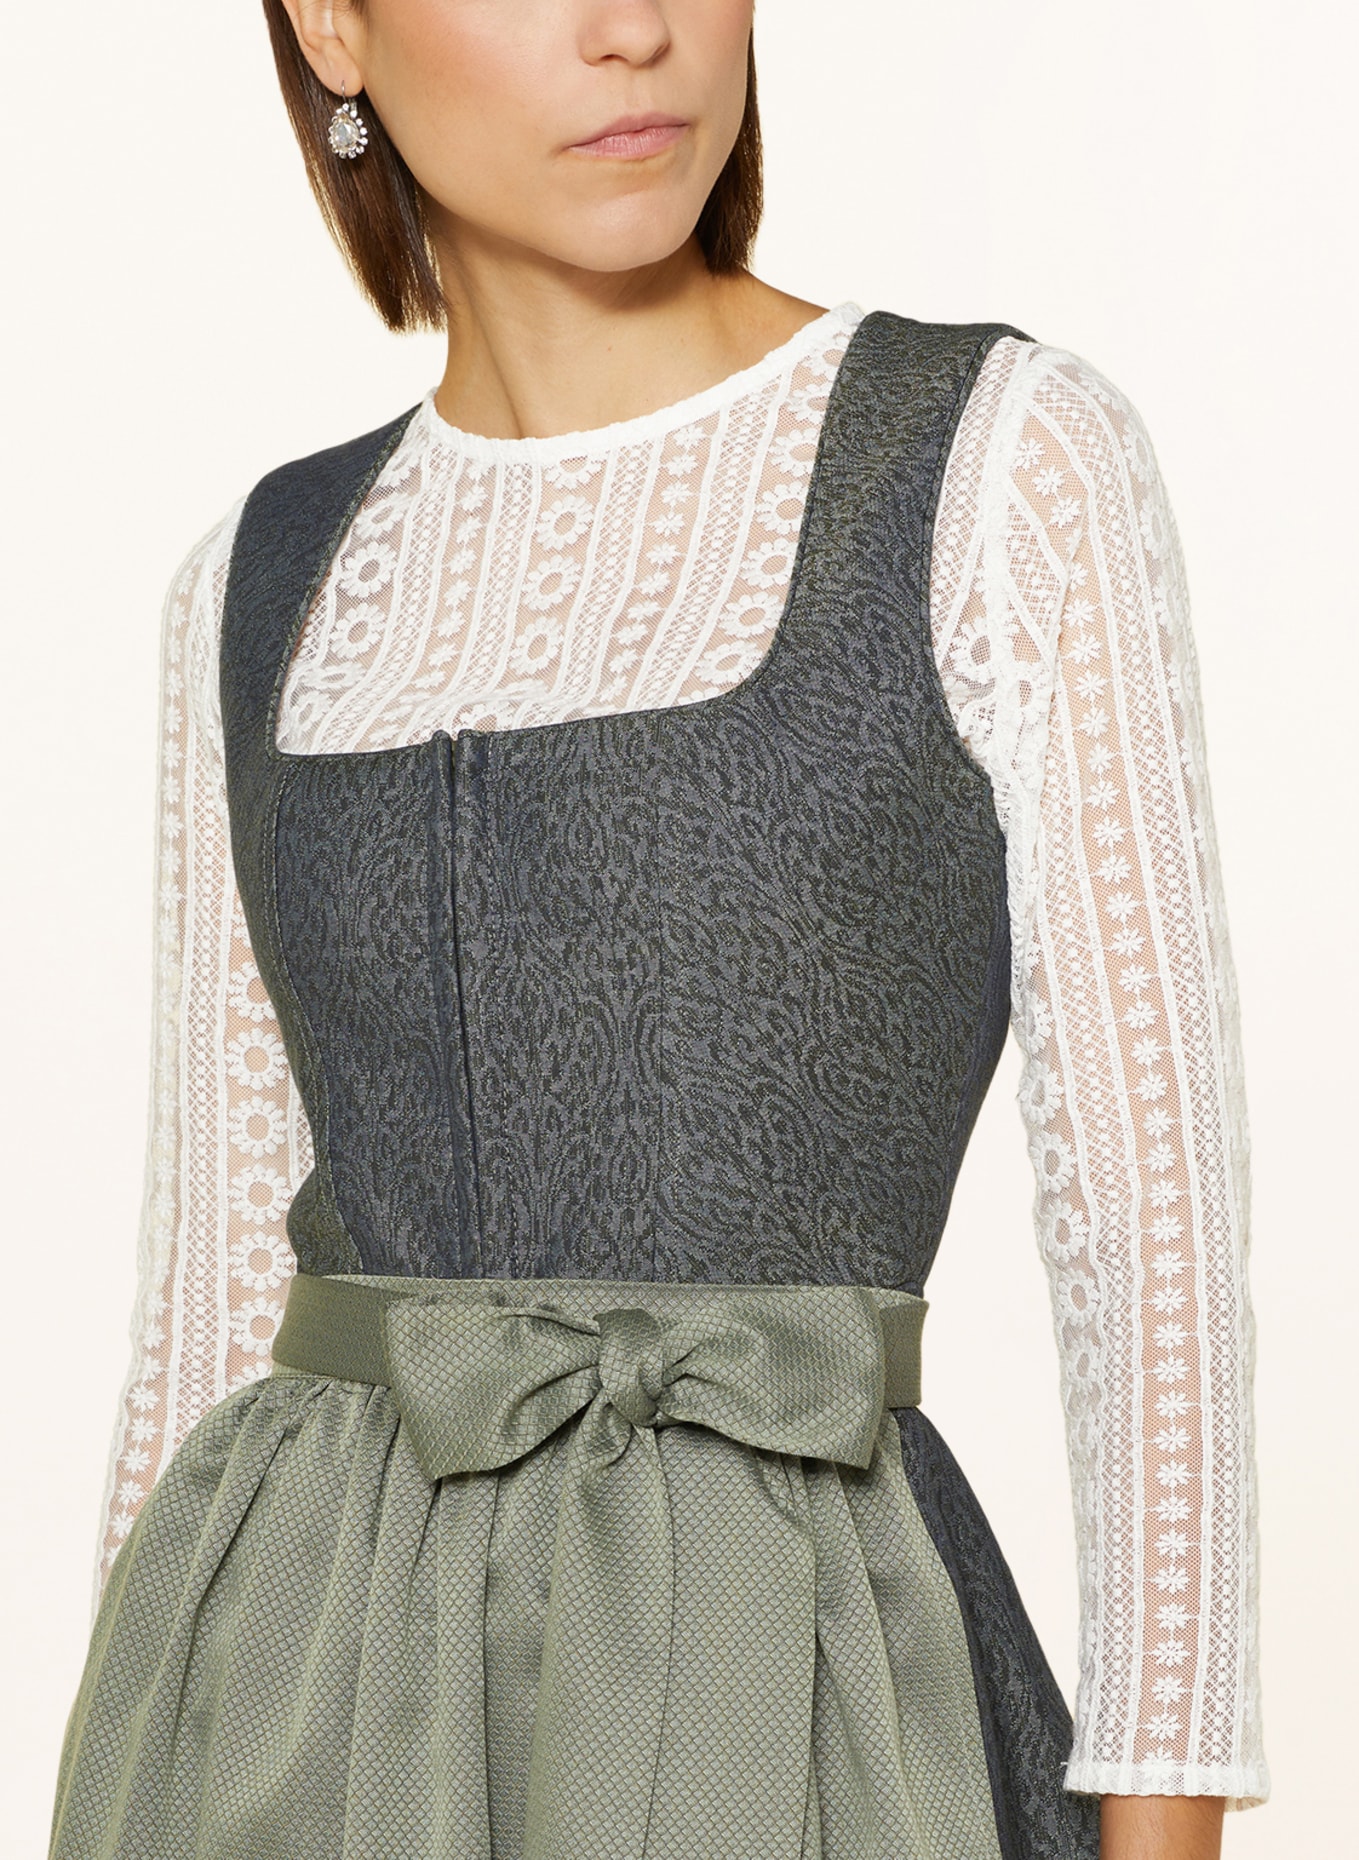 LIMBERRY Dirndl blouse THEA in lace with 3/4 sleeves, Color: WHITE (Image 3)